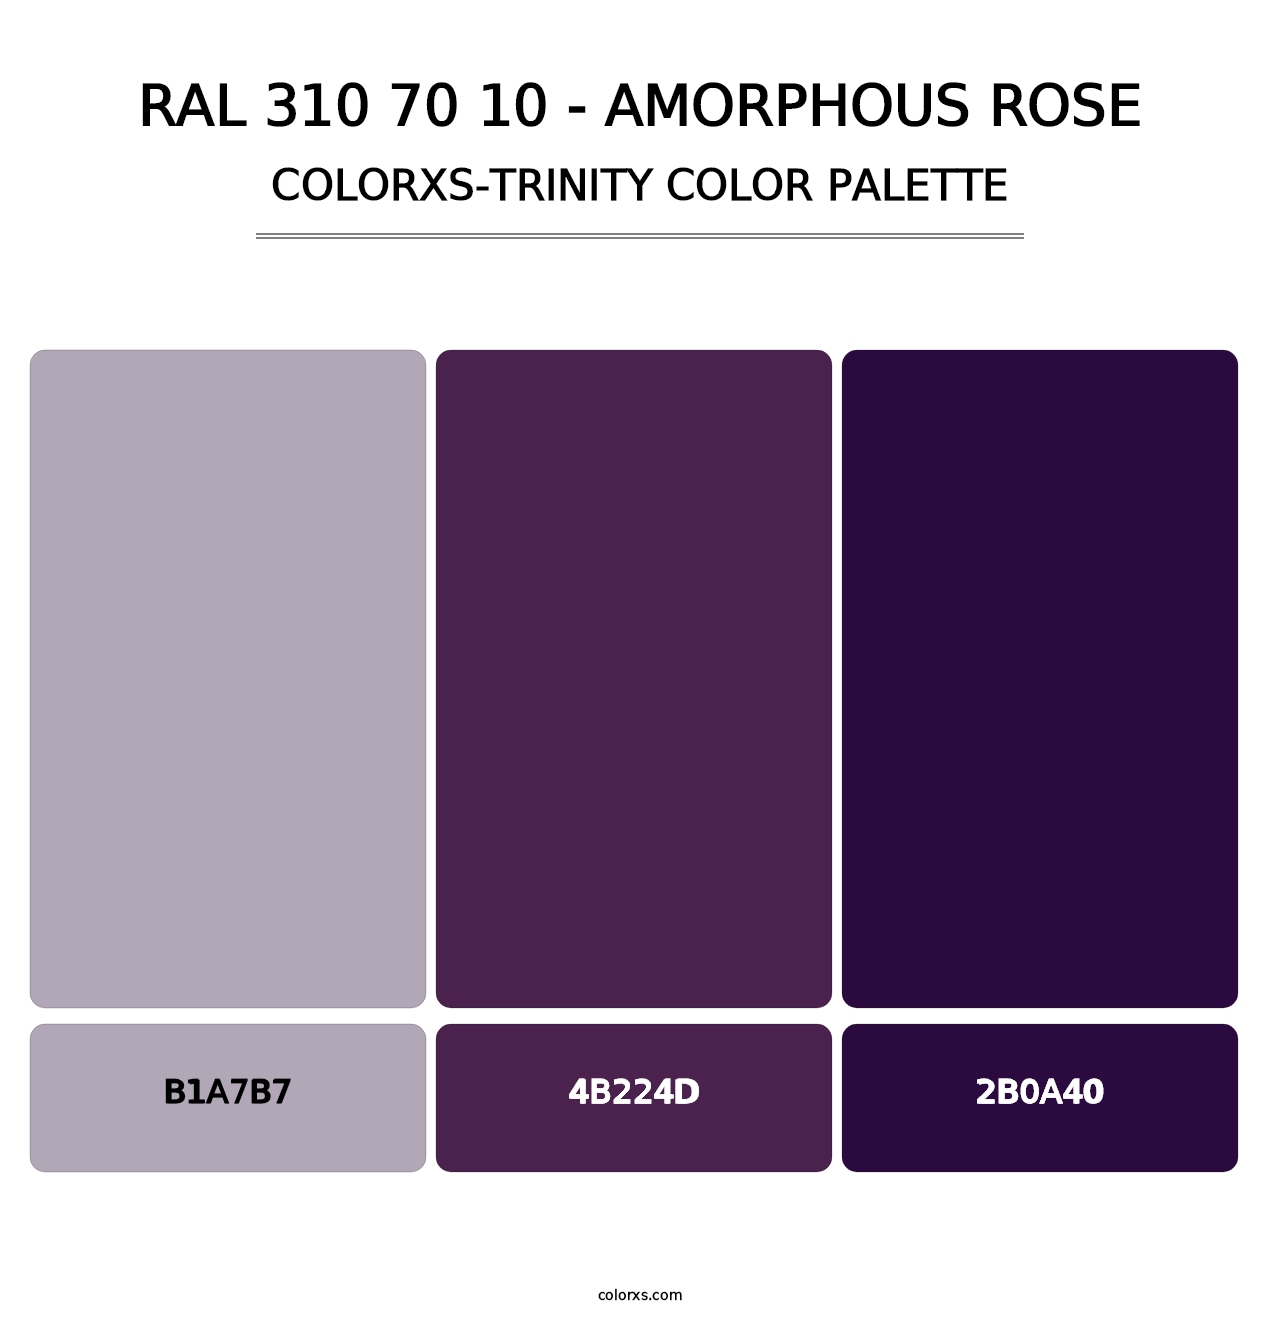 RAL 310 70 10 - Amorphous Rose - Colorxs Trinity Palette